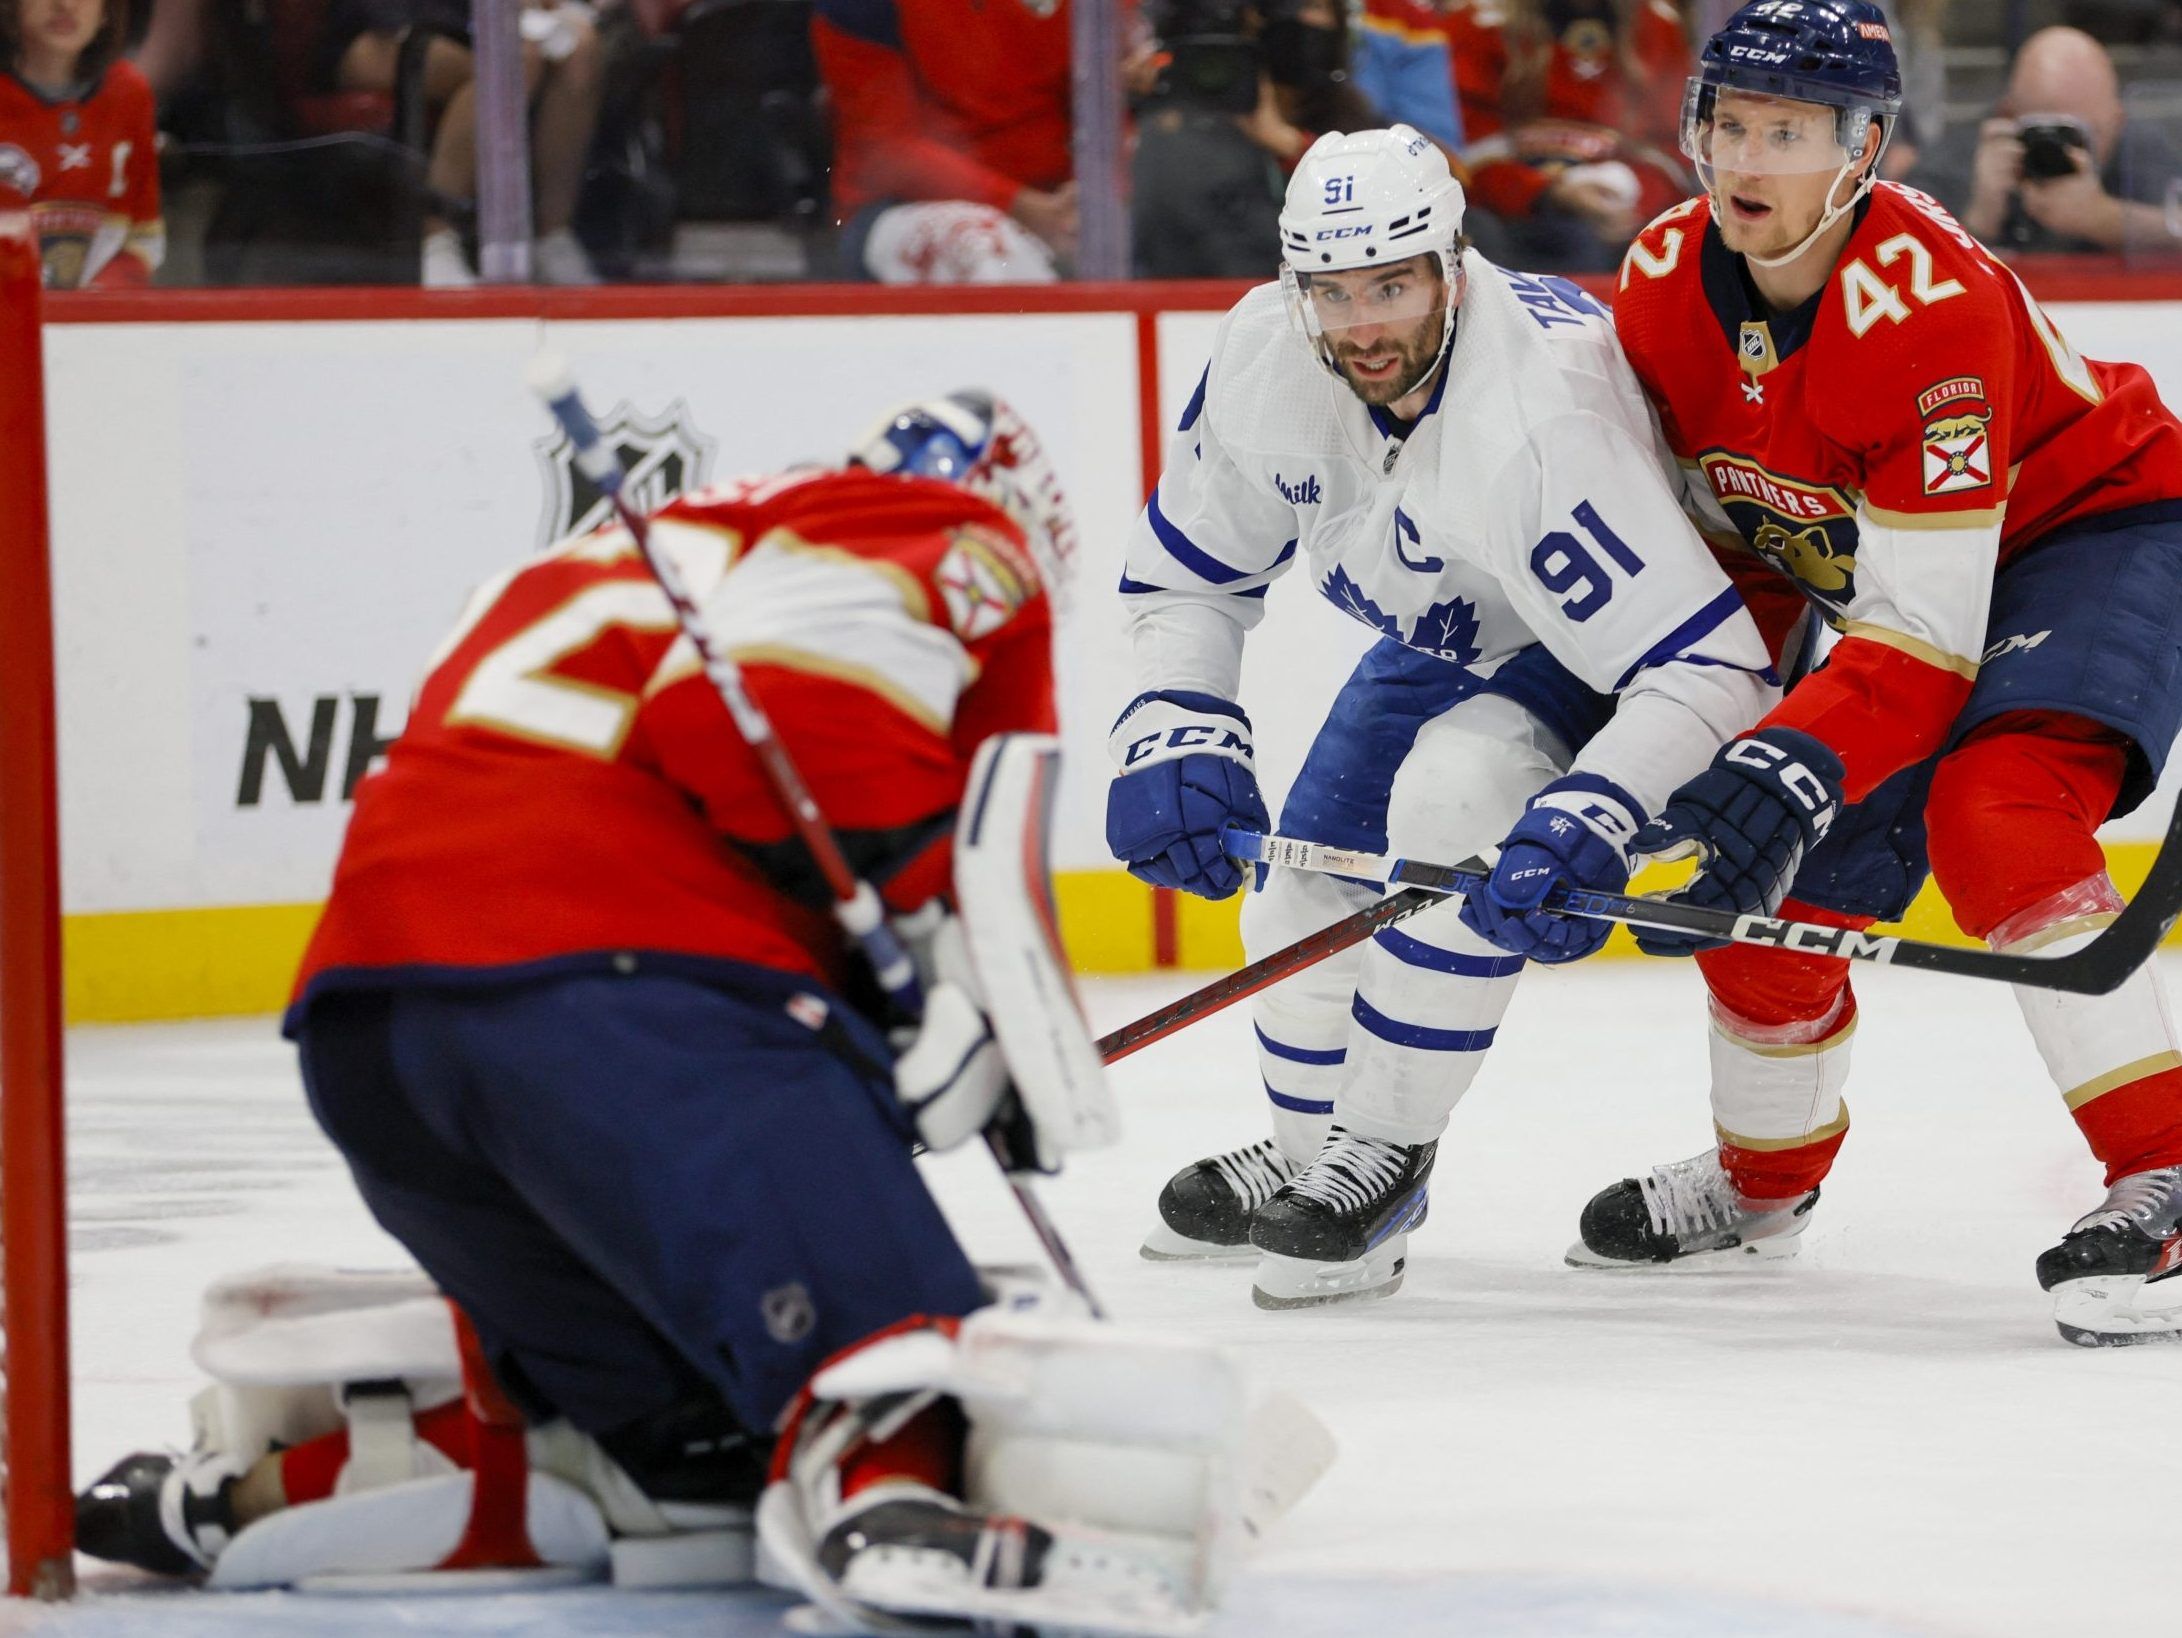 Toronto Maple Leafs: John Tavares needs to lead from the front in